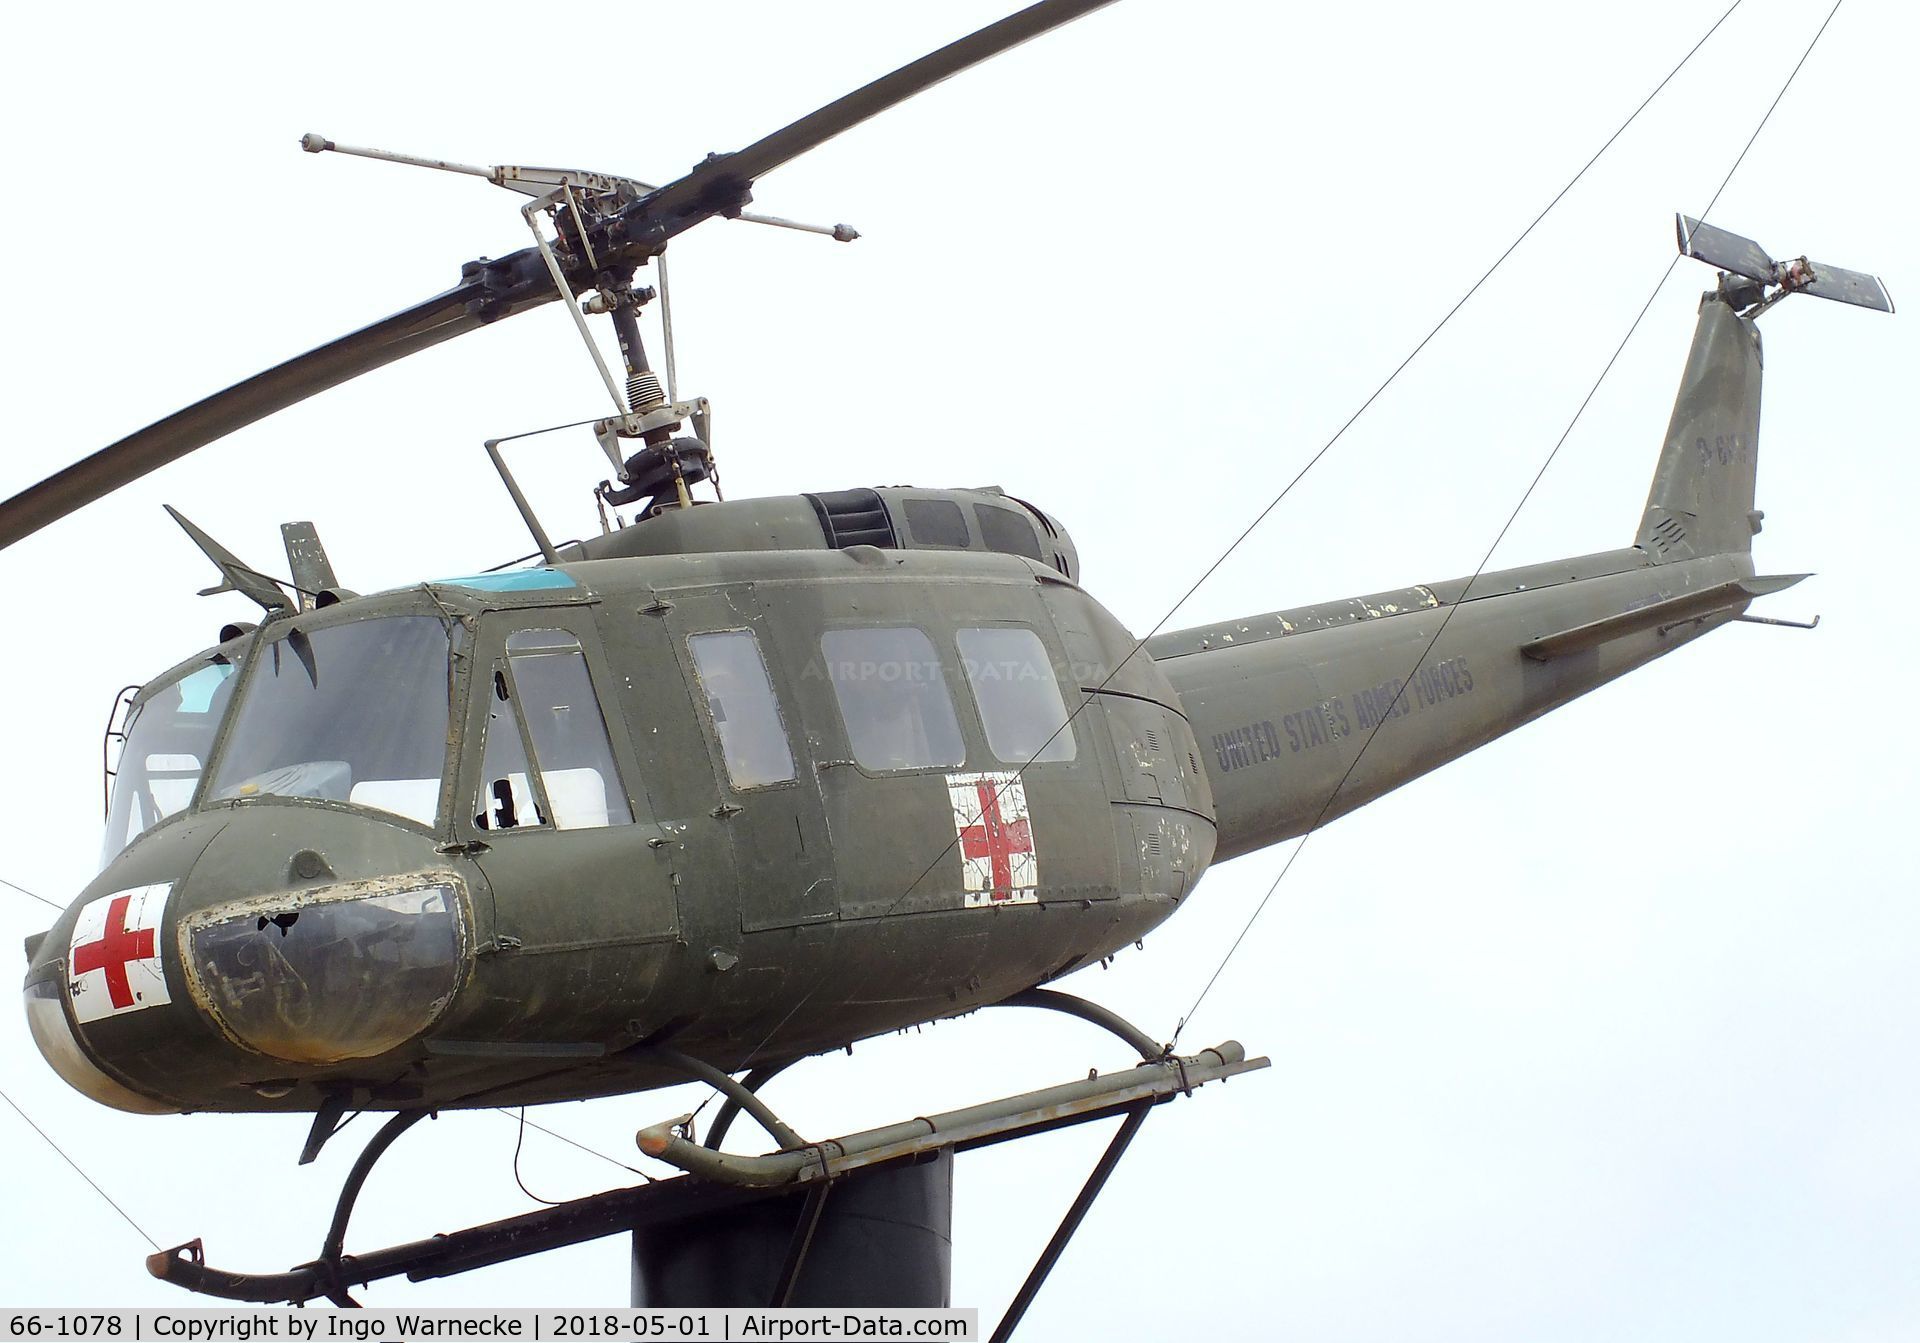 66-1078, 1966 Bell UH-1H Iroquois C/N 5561, Bell UH-1H Iroquois at the Vietnam Memorial, Big Spring TX